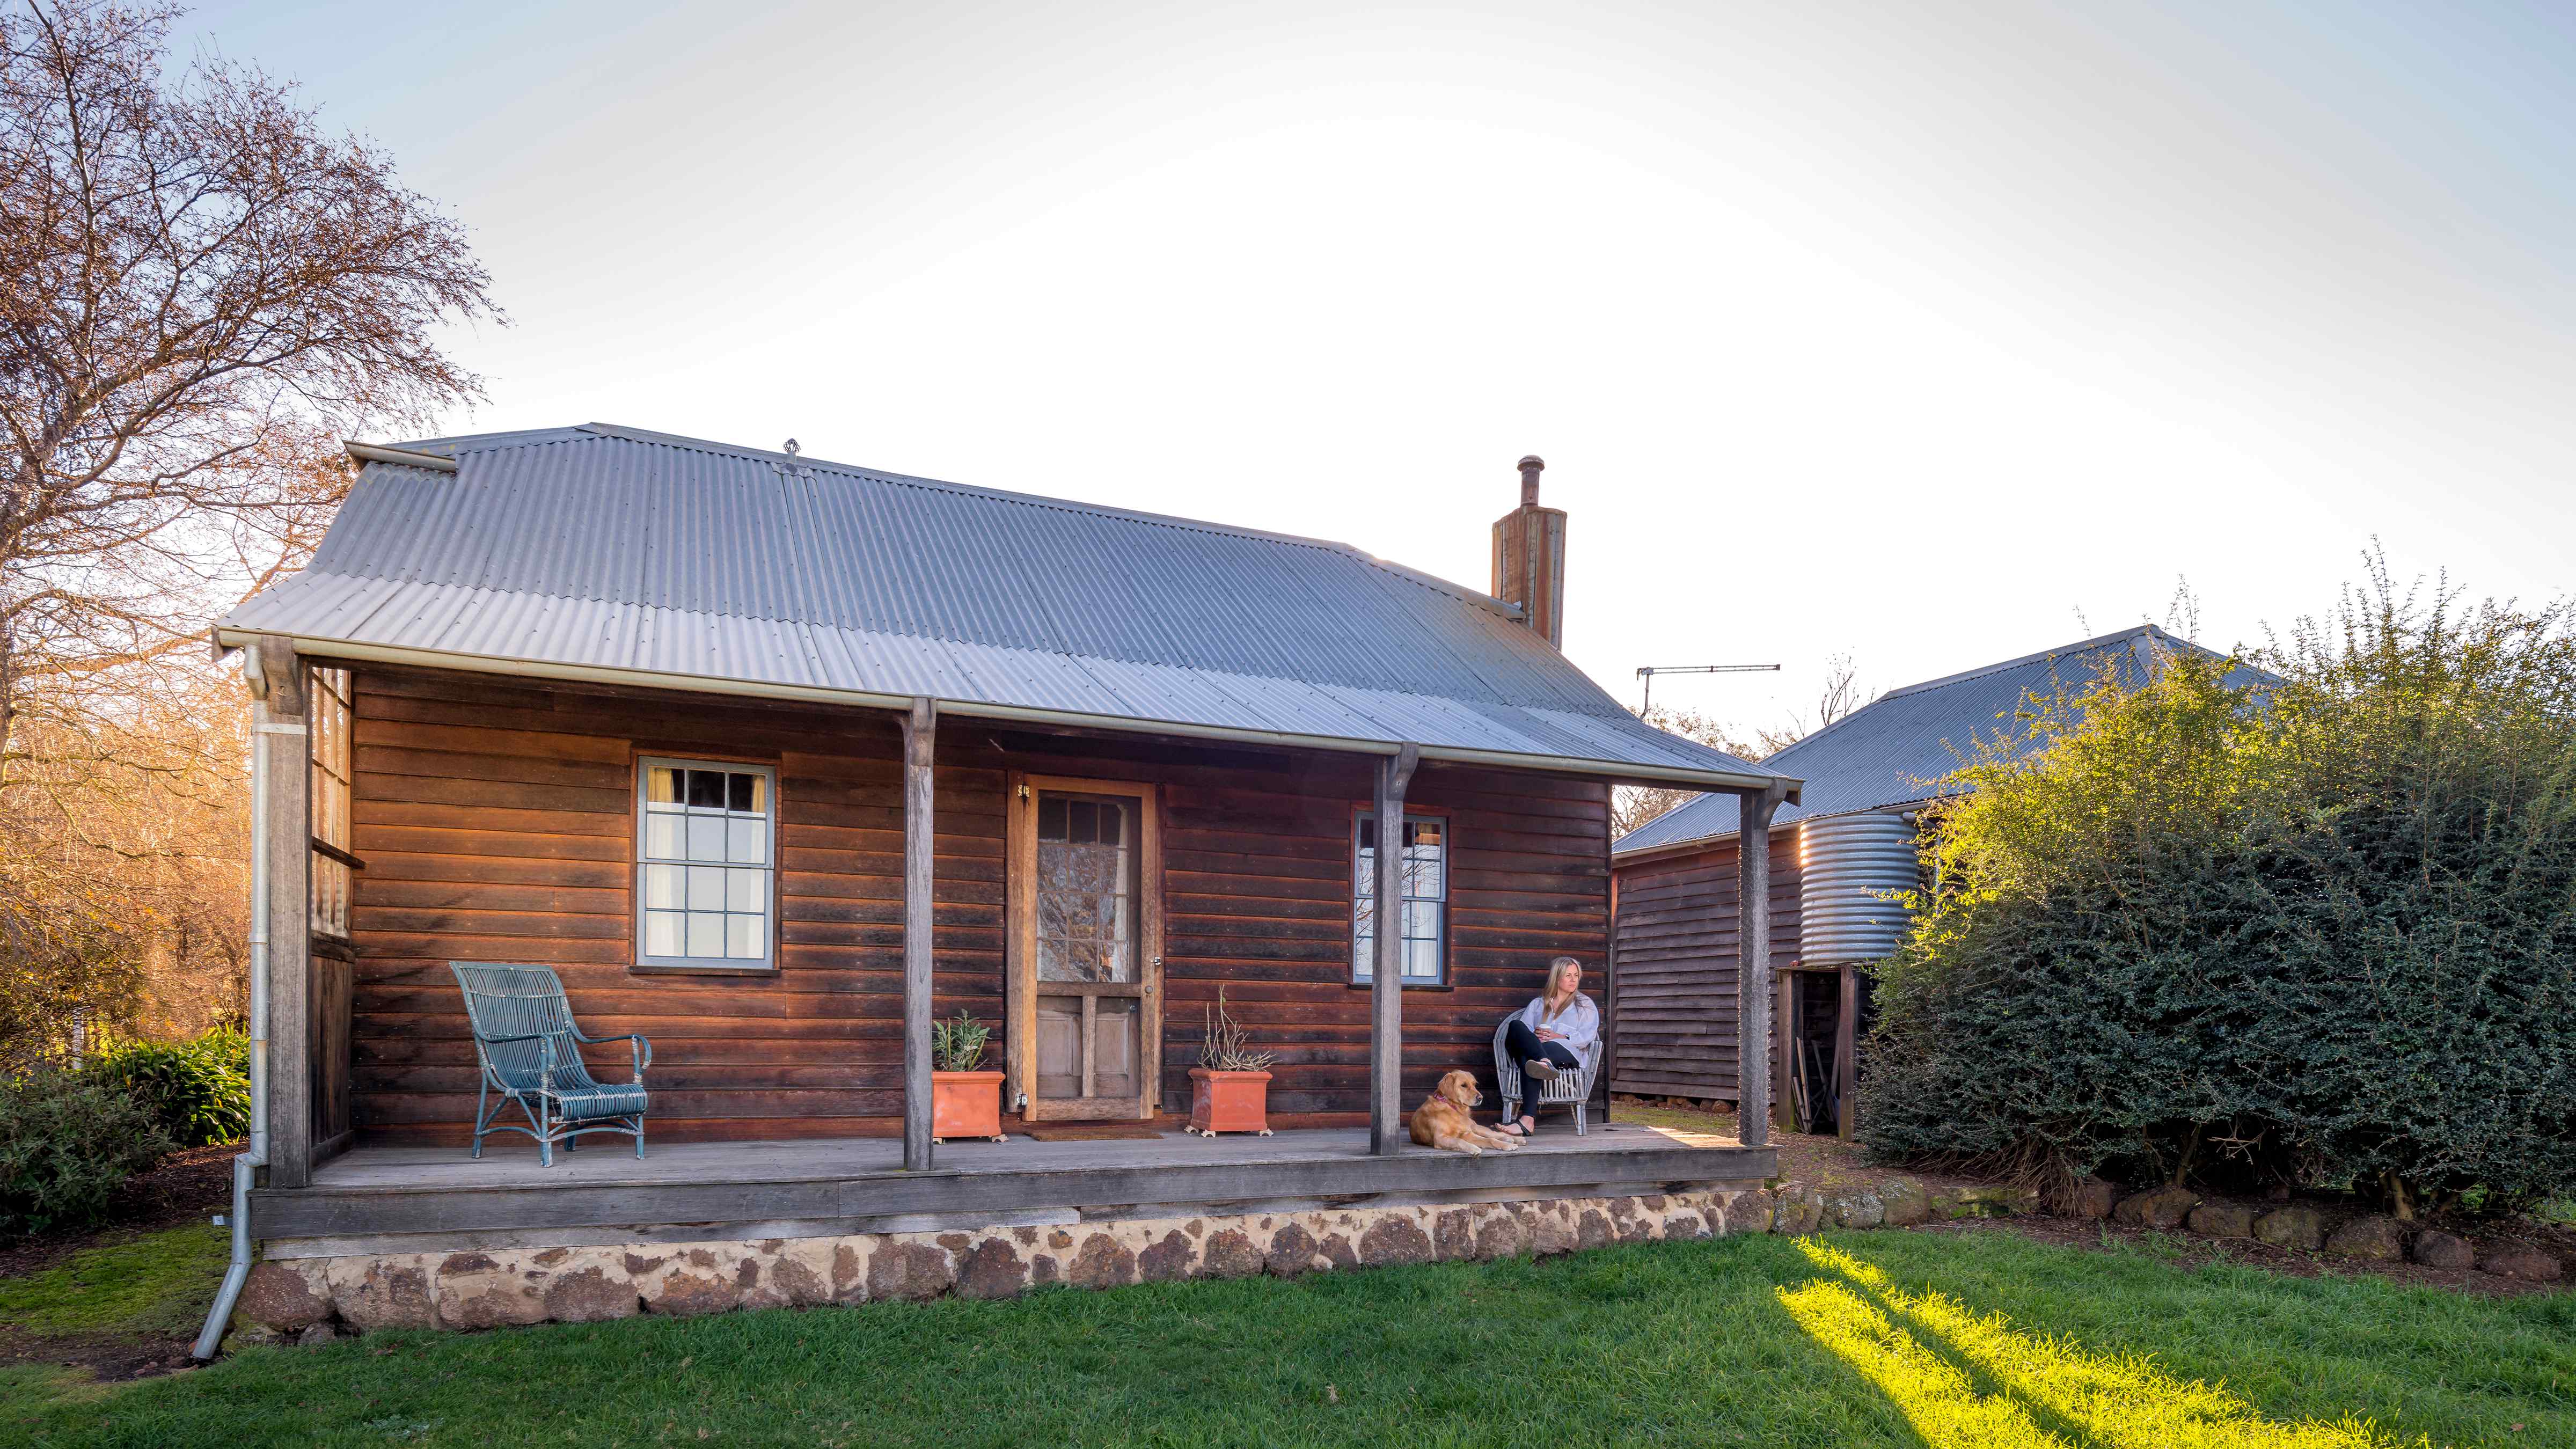 The external verandah of Pumpkin cottage has timber posts and horizontal weatherboard walls. Two windows and a timber front door with two square terracotta pots on either side A chimney stands to the right of the corrugated iron roof. A lady is sitting in a chair with a golden retriever; they are looking into the distance. A shaft of sunlight is shining through a gap beside the cottage on to the grass. Photo: Rob Burnett.